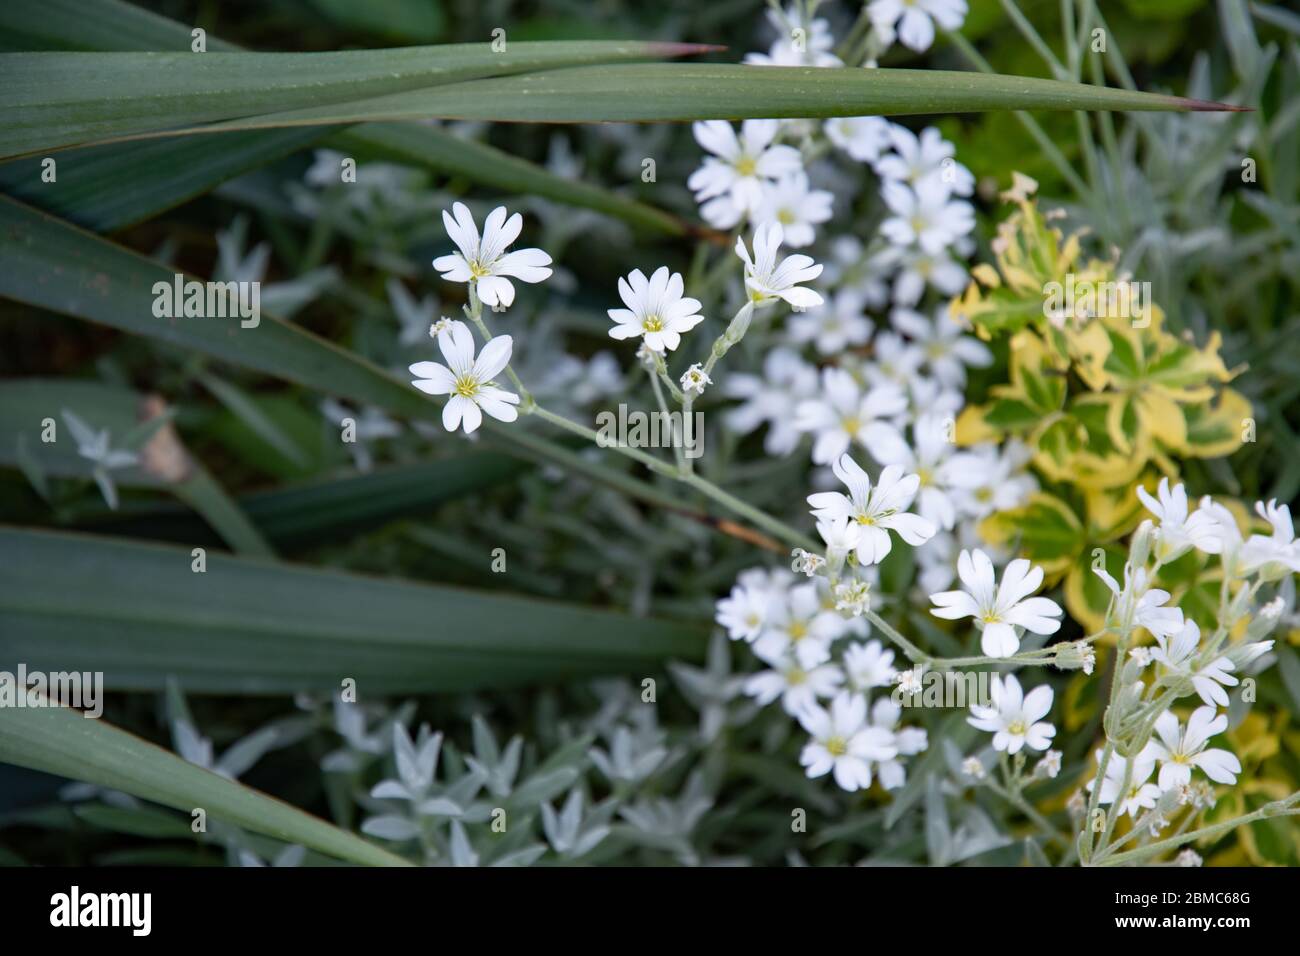 Bunch of tiny white flowers among lush variegated leaves and succulents on flowerbed of Alpine slide in garden. Herbal texture of garden plants and fl Stock Photo